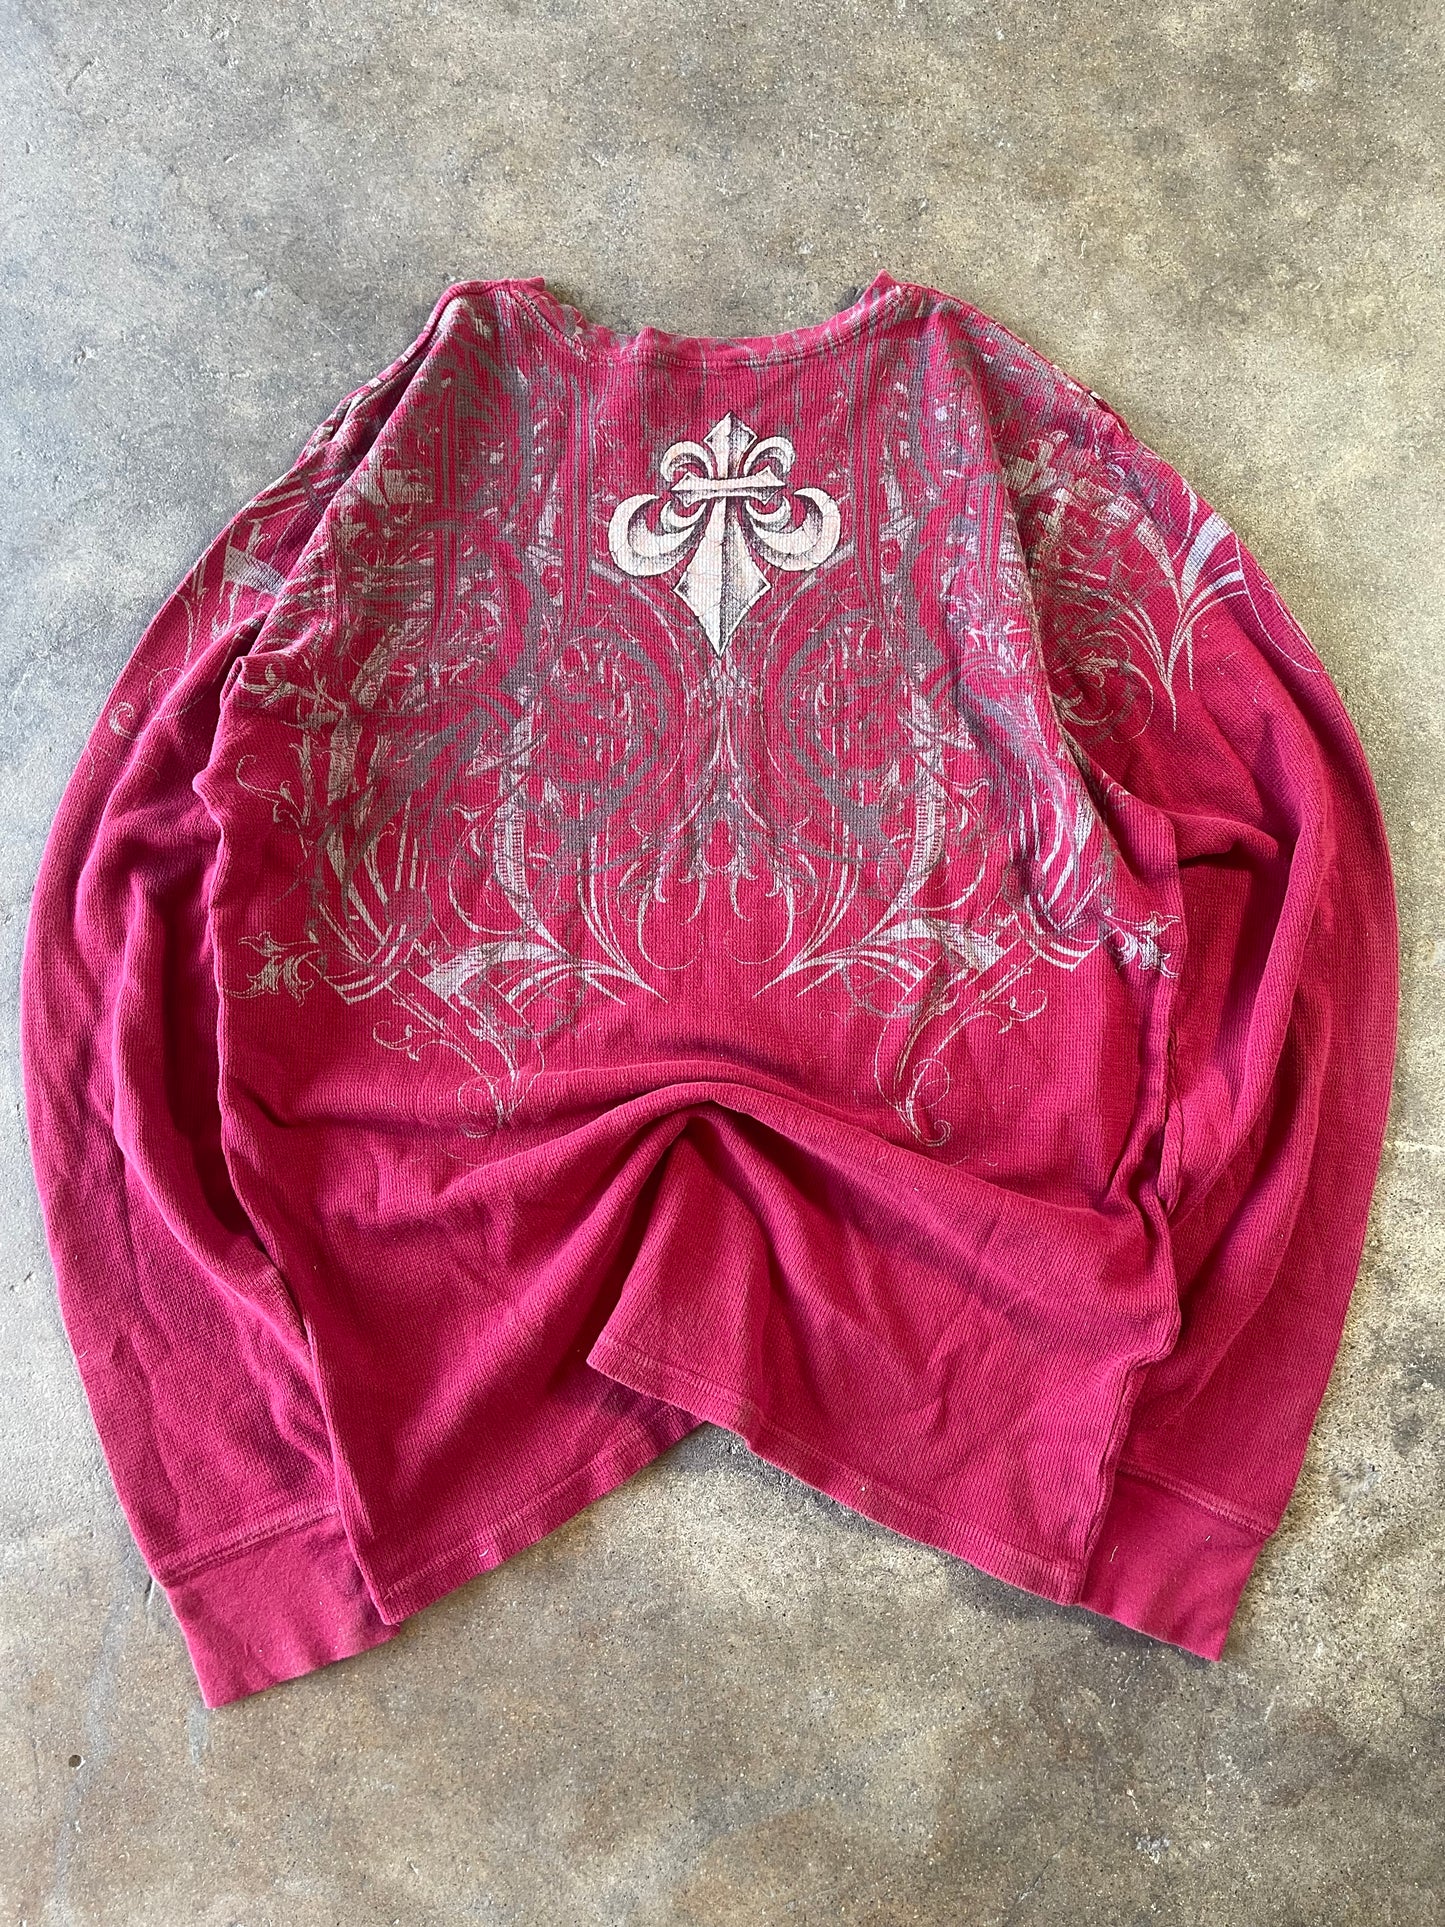 ‘00s Crimson Red Affliction Thermal XL